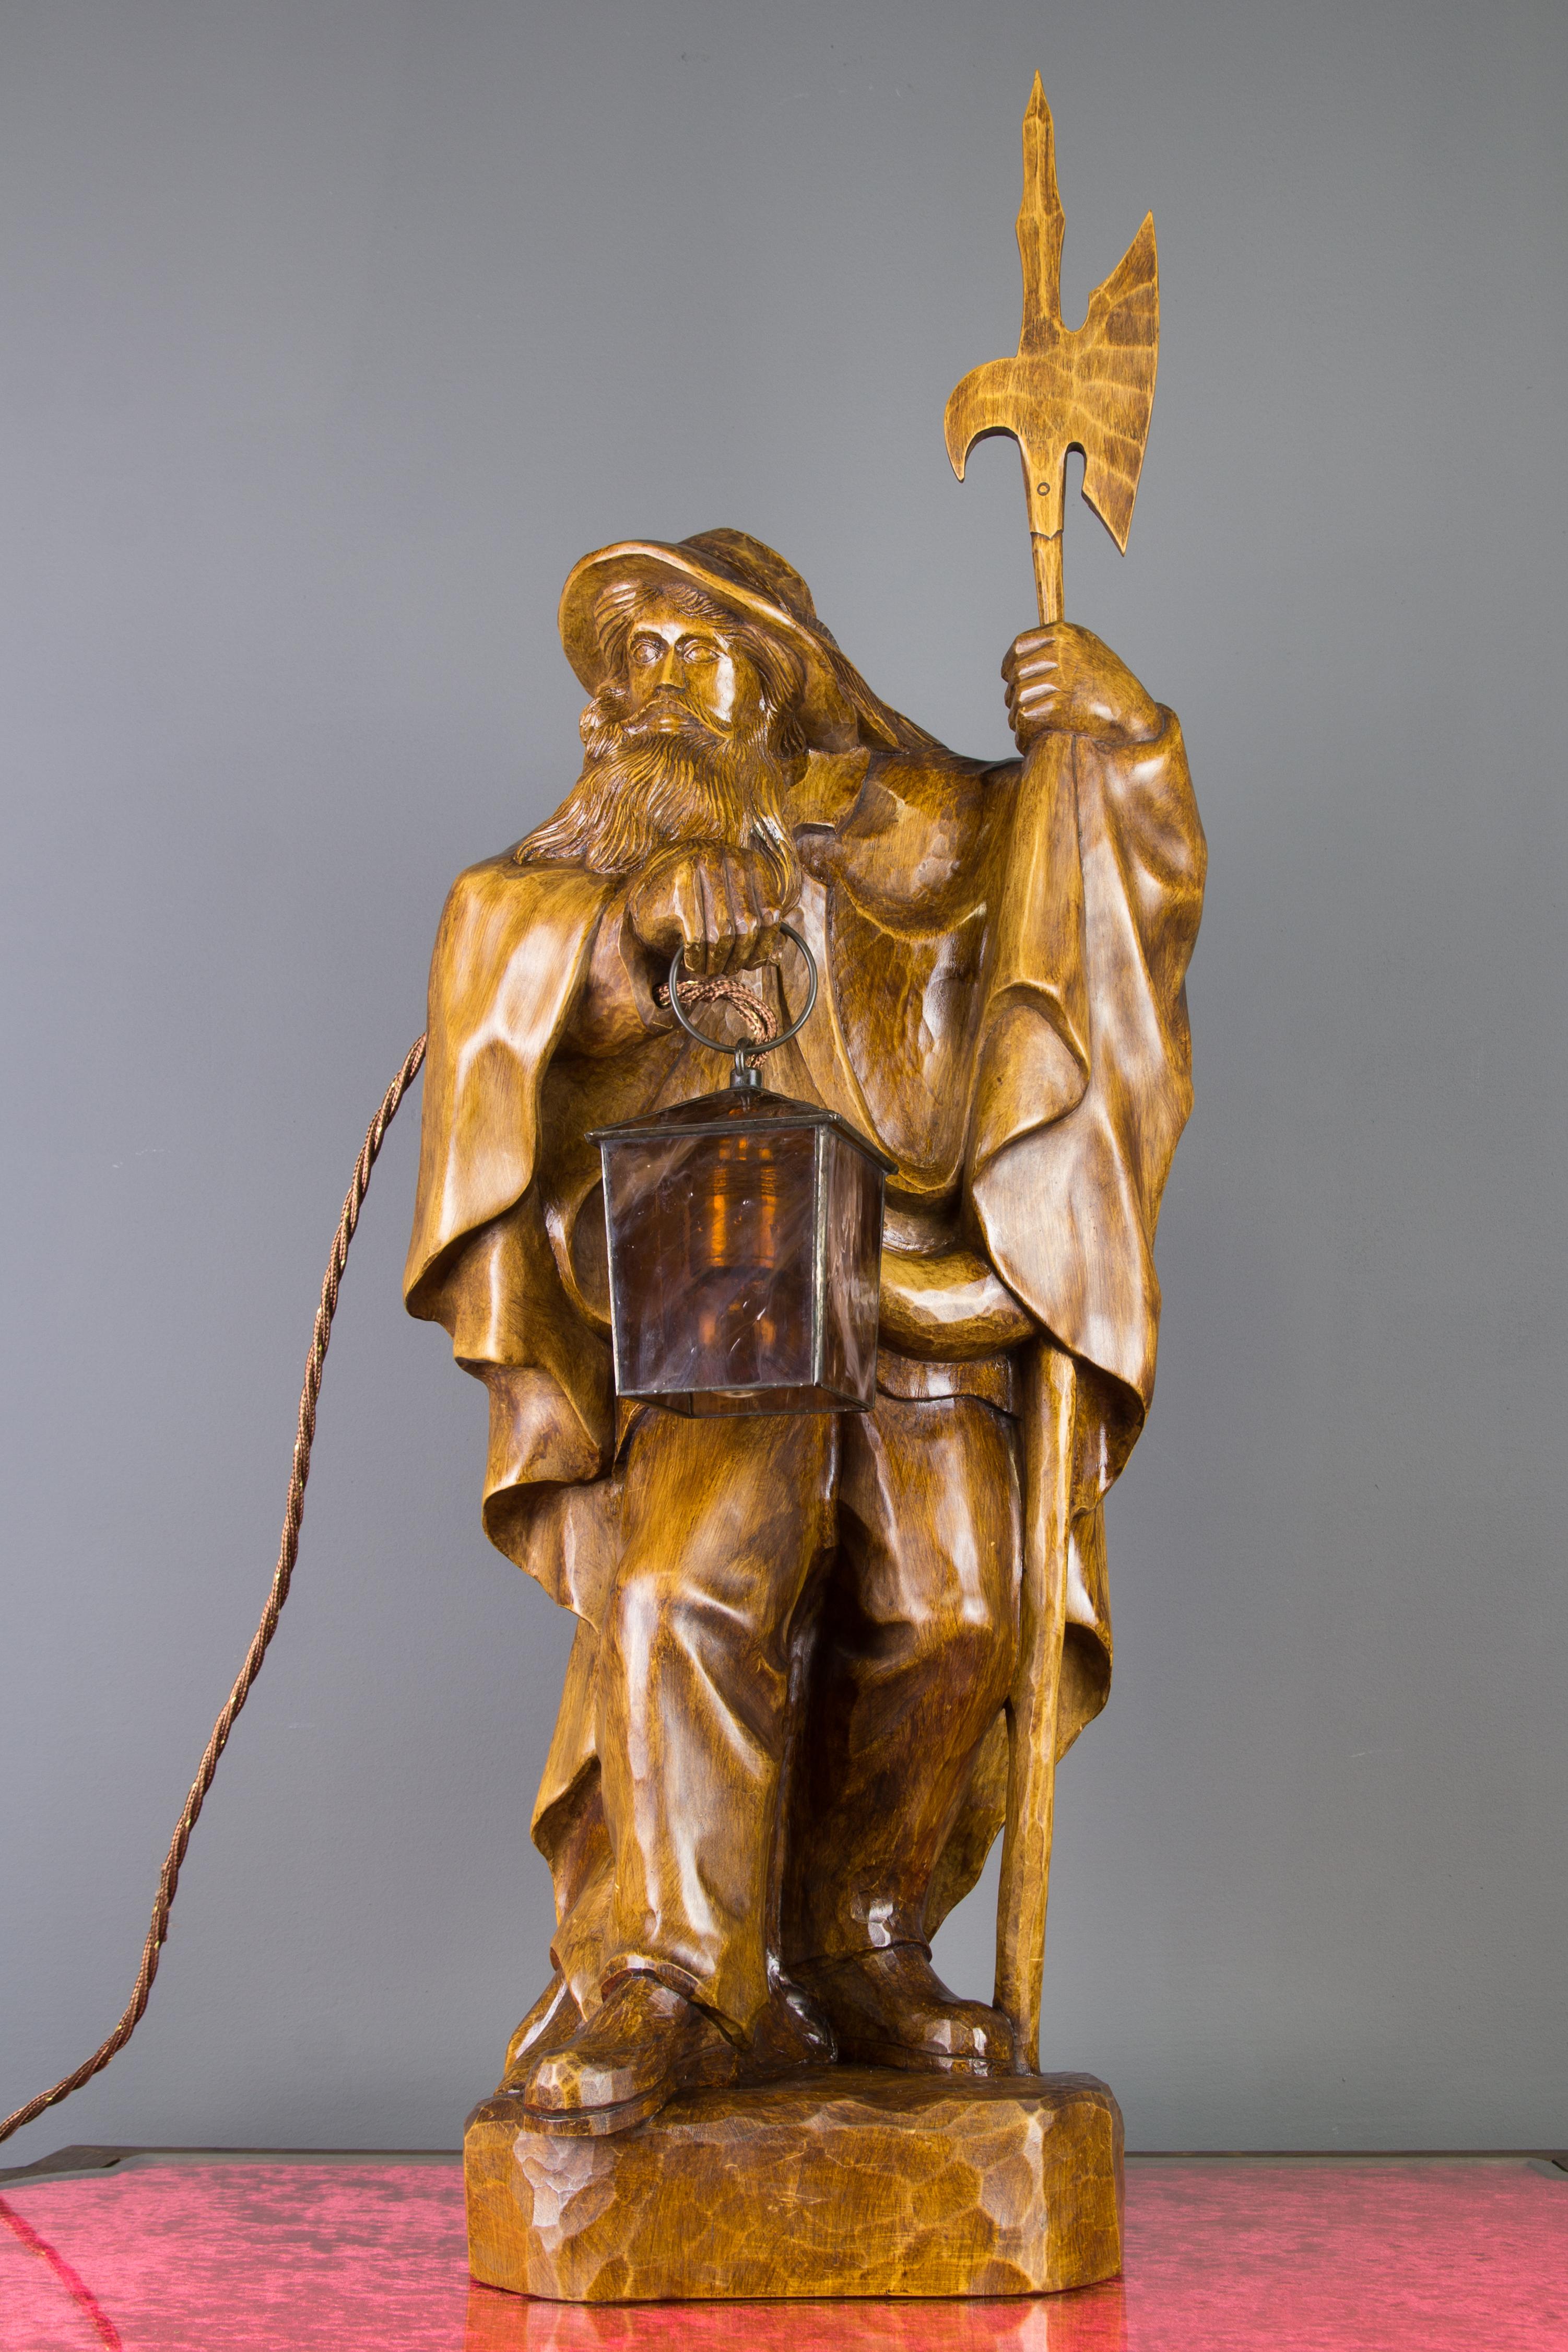 Large German hand-carved wooden sculpture lamp night watchman with lantern from the 1950s.
This masterfully hand-carved wooden lamp features a large sculpture of a night watchman with a lantern and halberd. Lantern is made of glass and iron. This